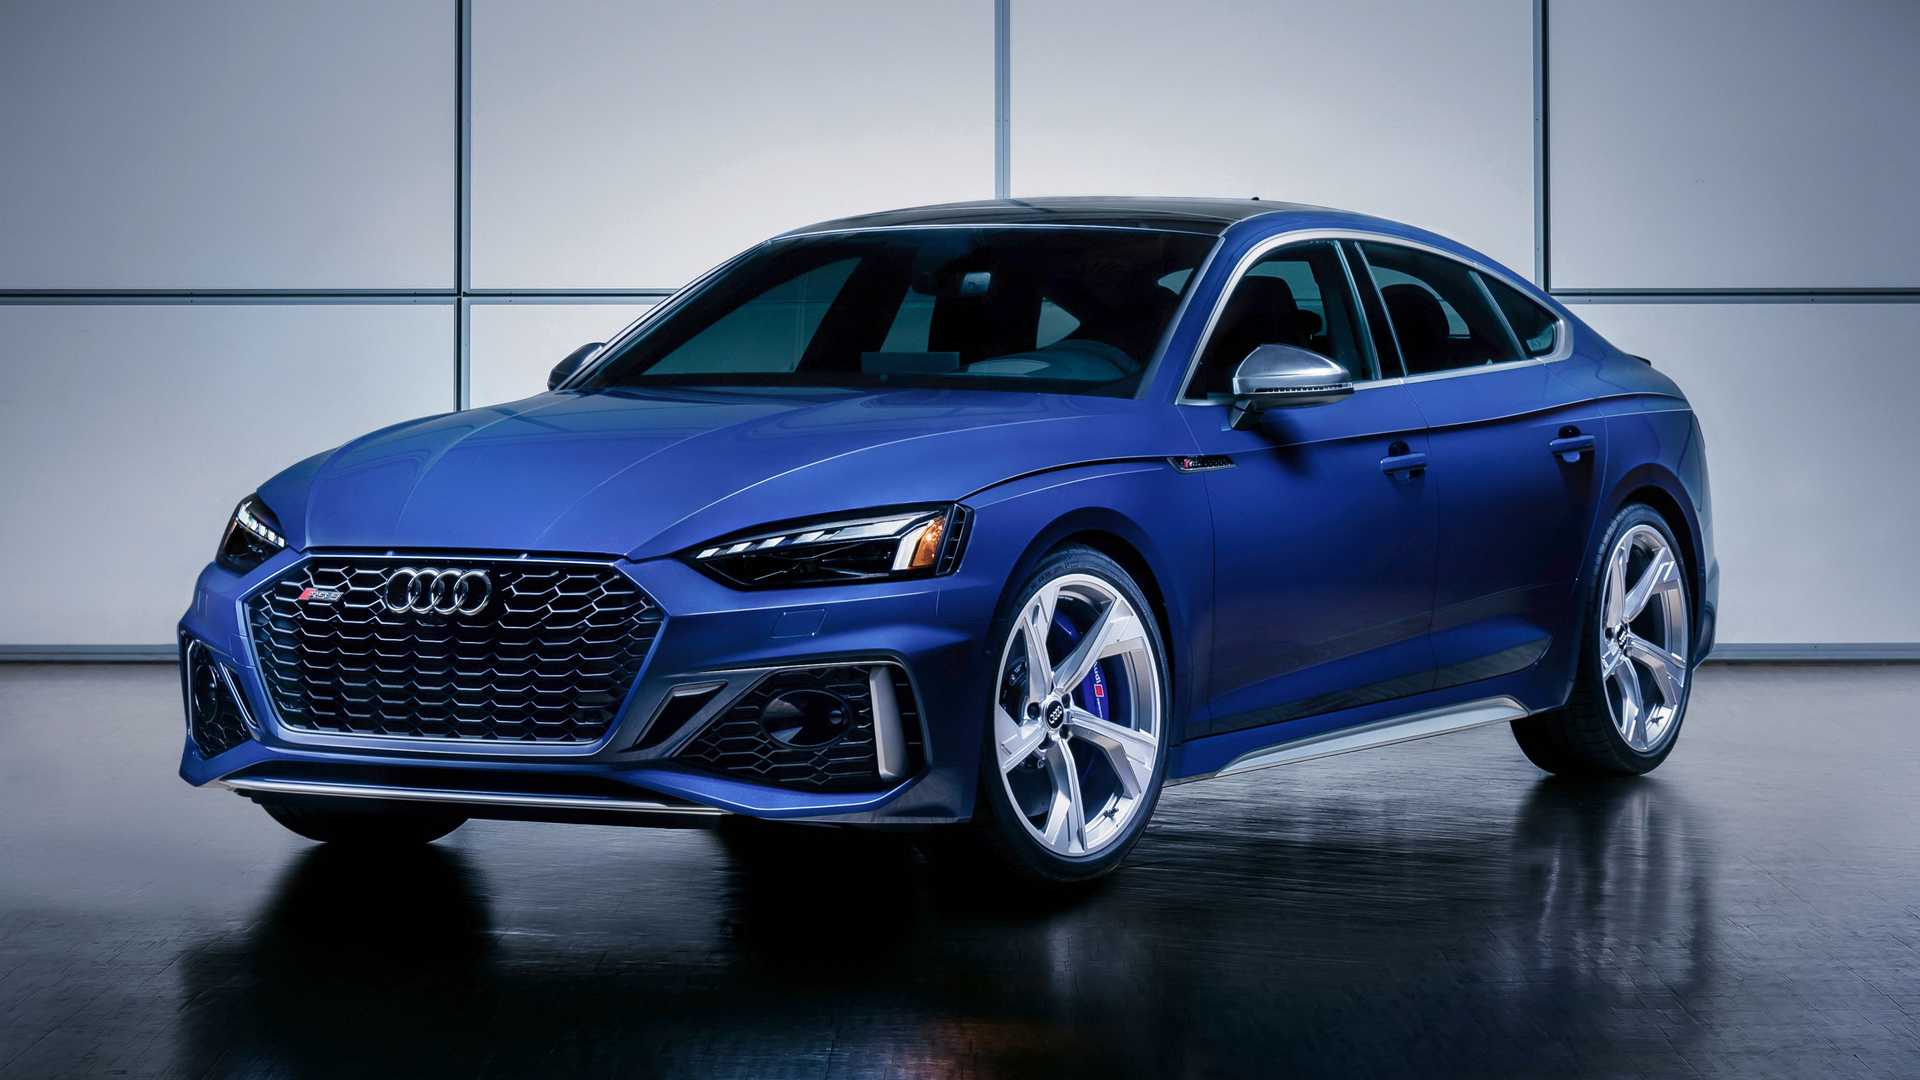 2021 Audi RS 5 Coupe and Sportback Go for Ascari and Black Styles in U